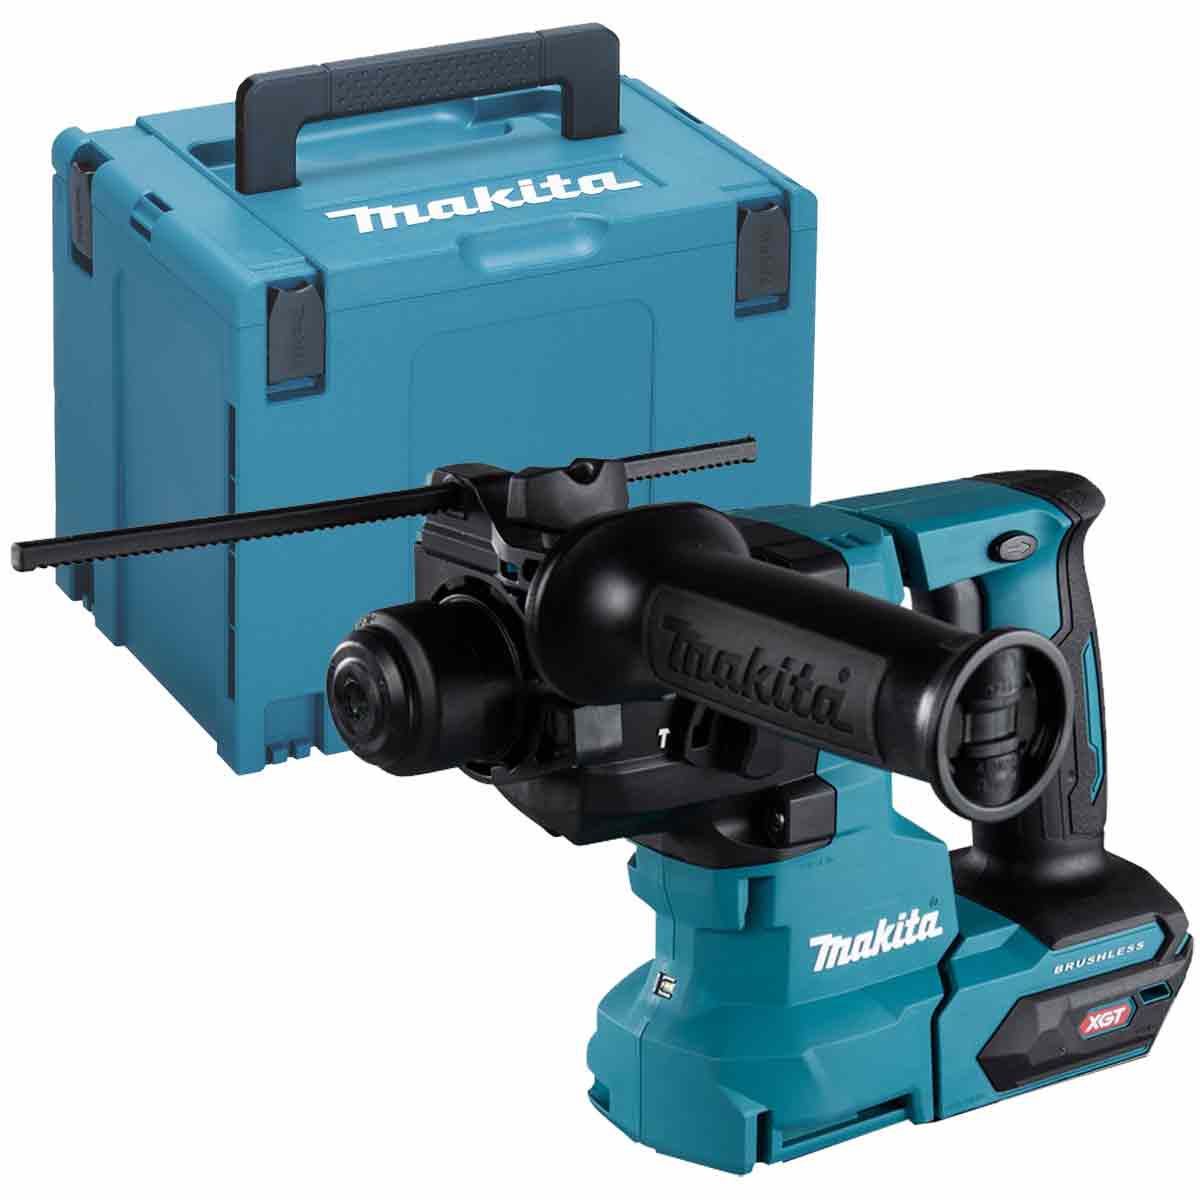 Makita HR010GZ01 40V XGT Brushless SDS Plus Rotary Hammer Drill With Type 4 Case